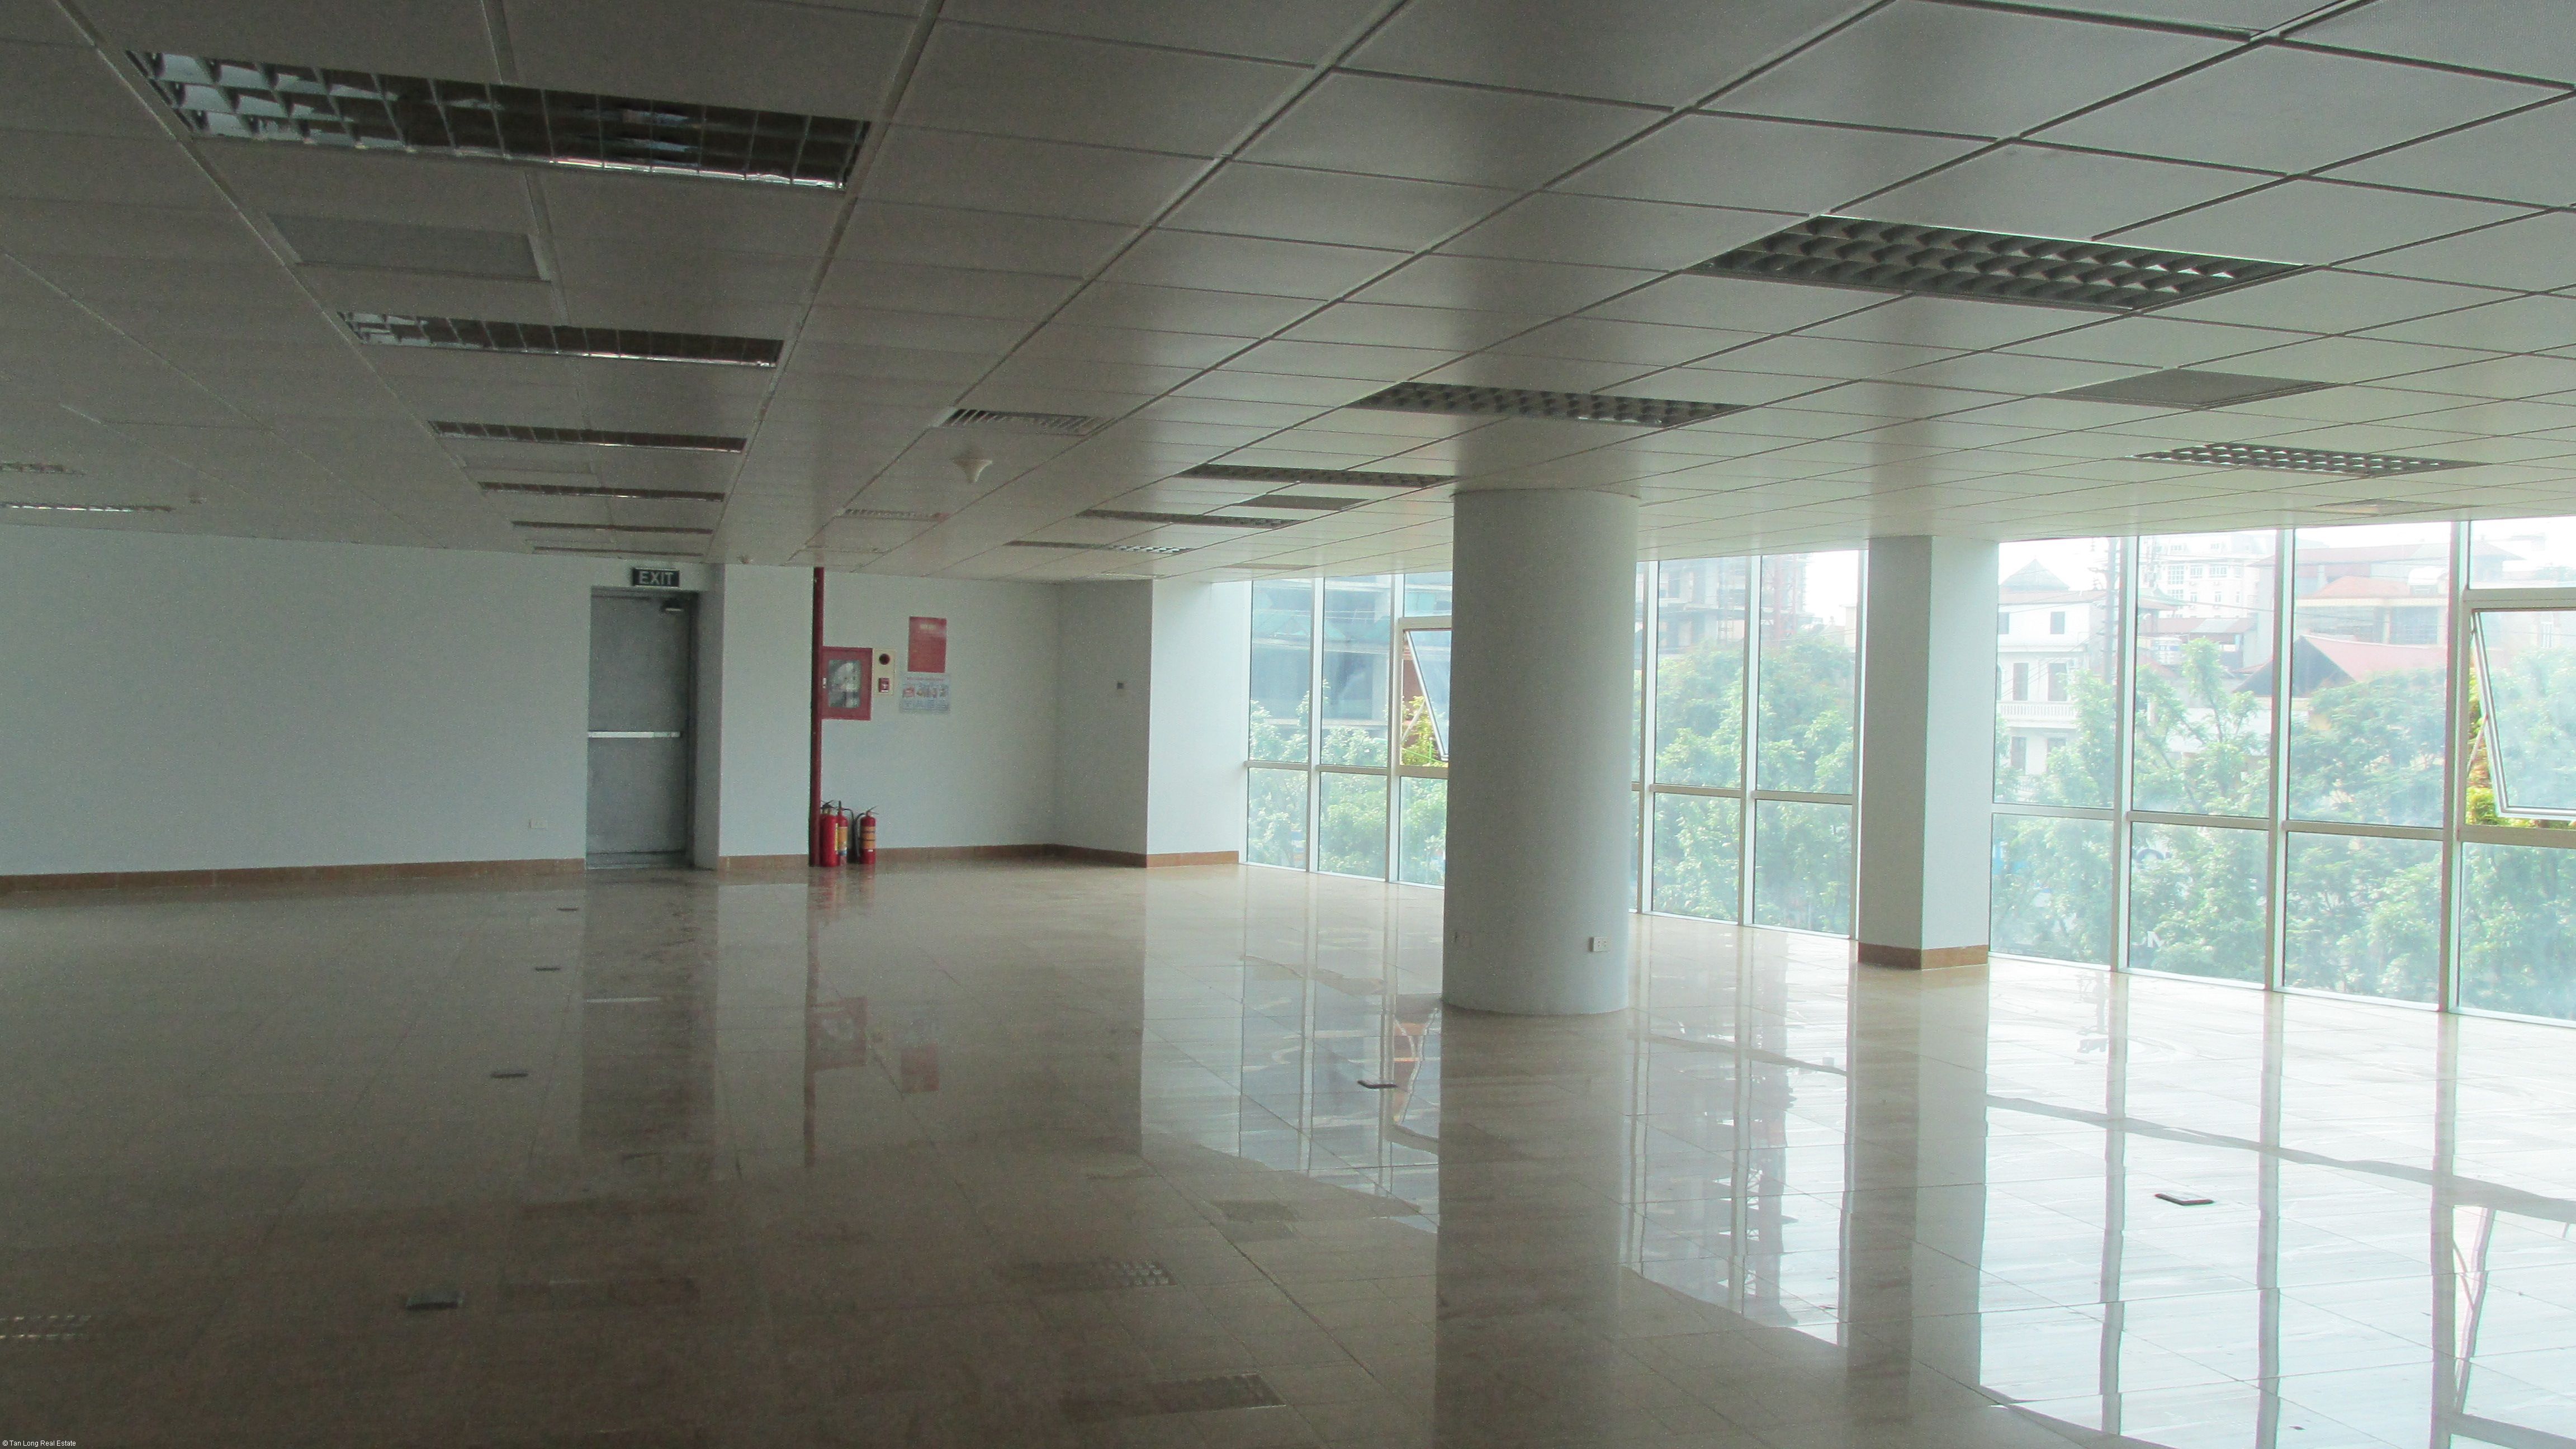 Office for rent in professional office building in Tran Hung Dao street, Hoan Kiem District, Hanoi. 2